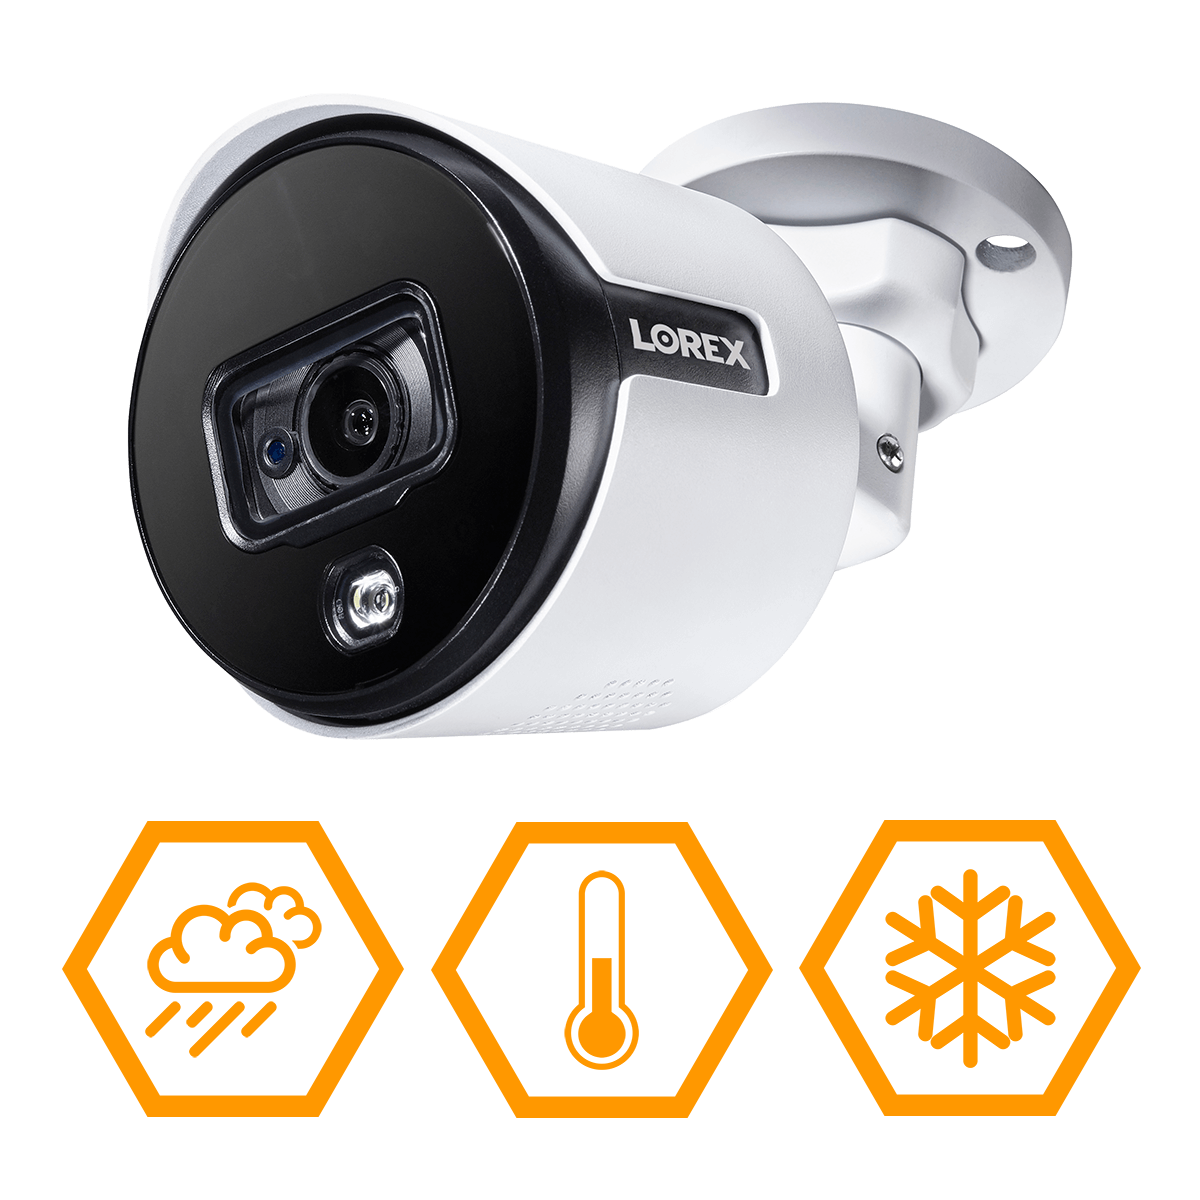 4K IP67 weatherproof security camera for year-round protection